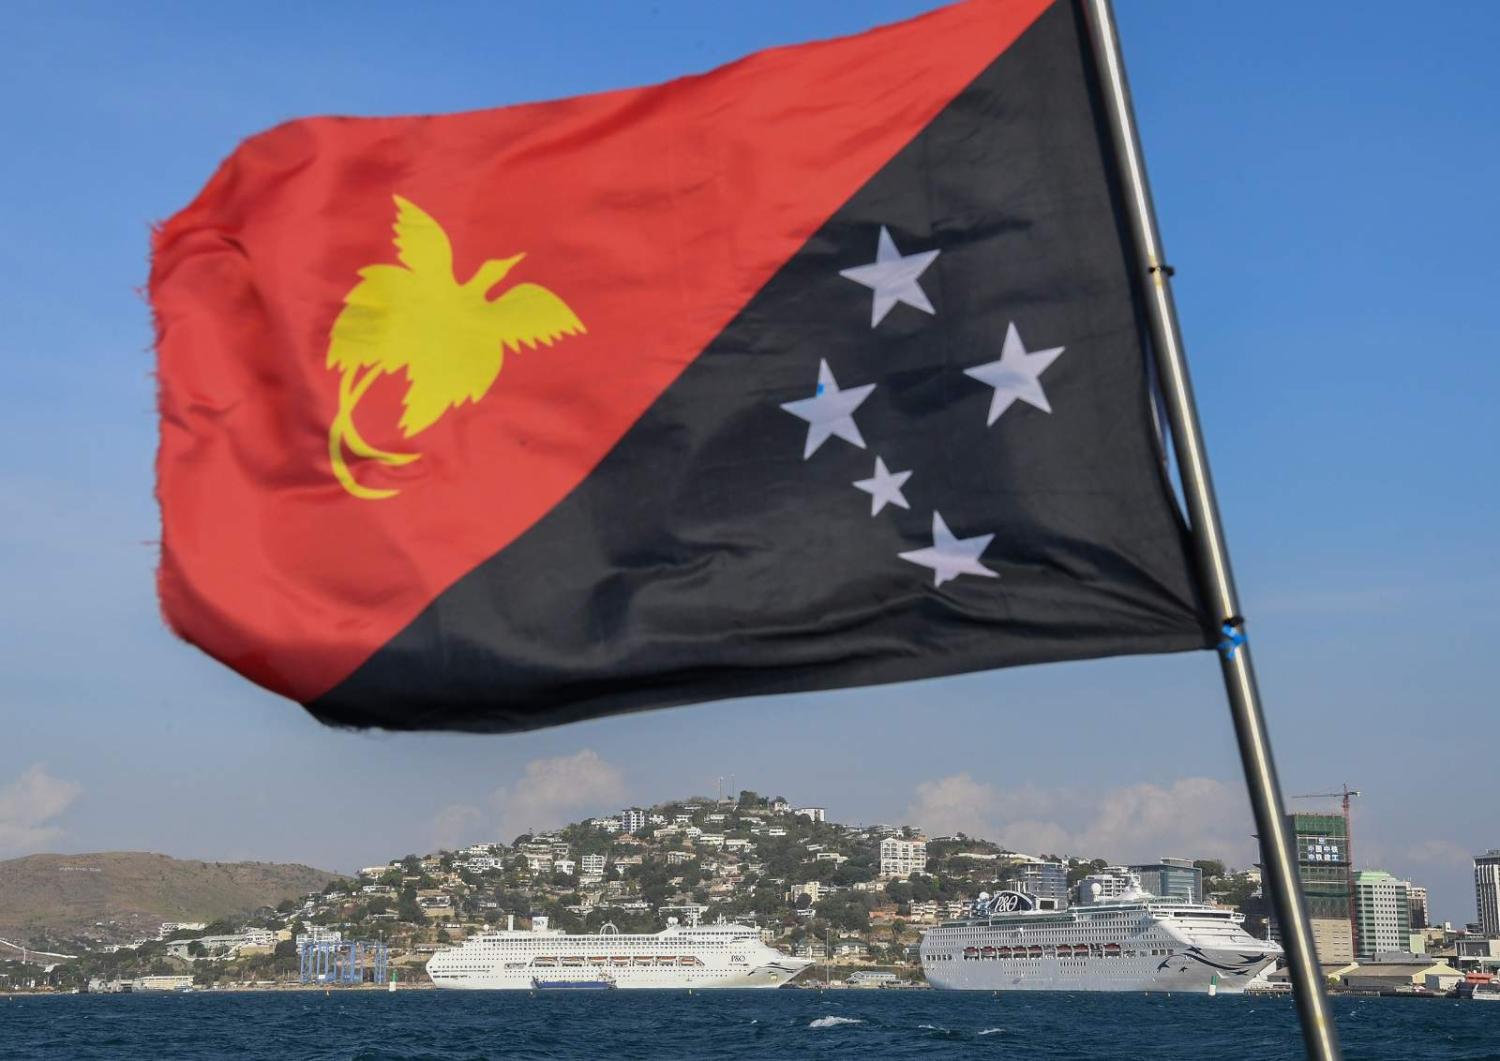 Papua New Guinea must rethink the role of public diplomacy (James D. Morgan/Getty Images for Carnival Australia)